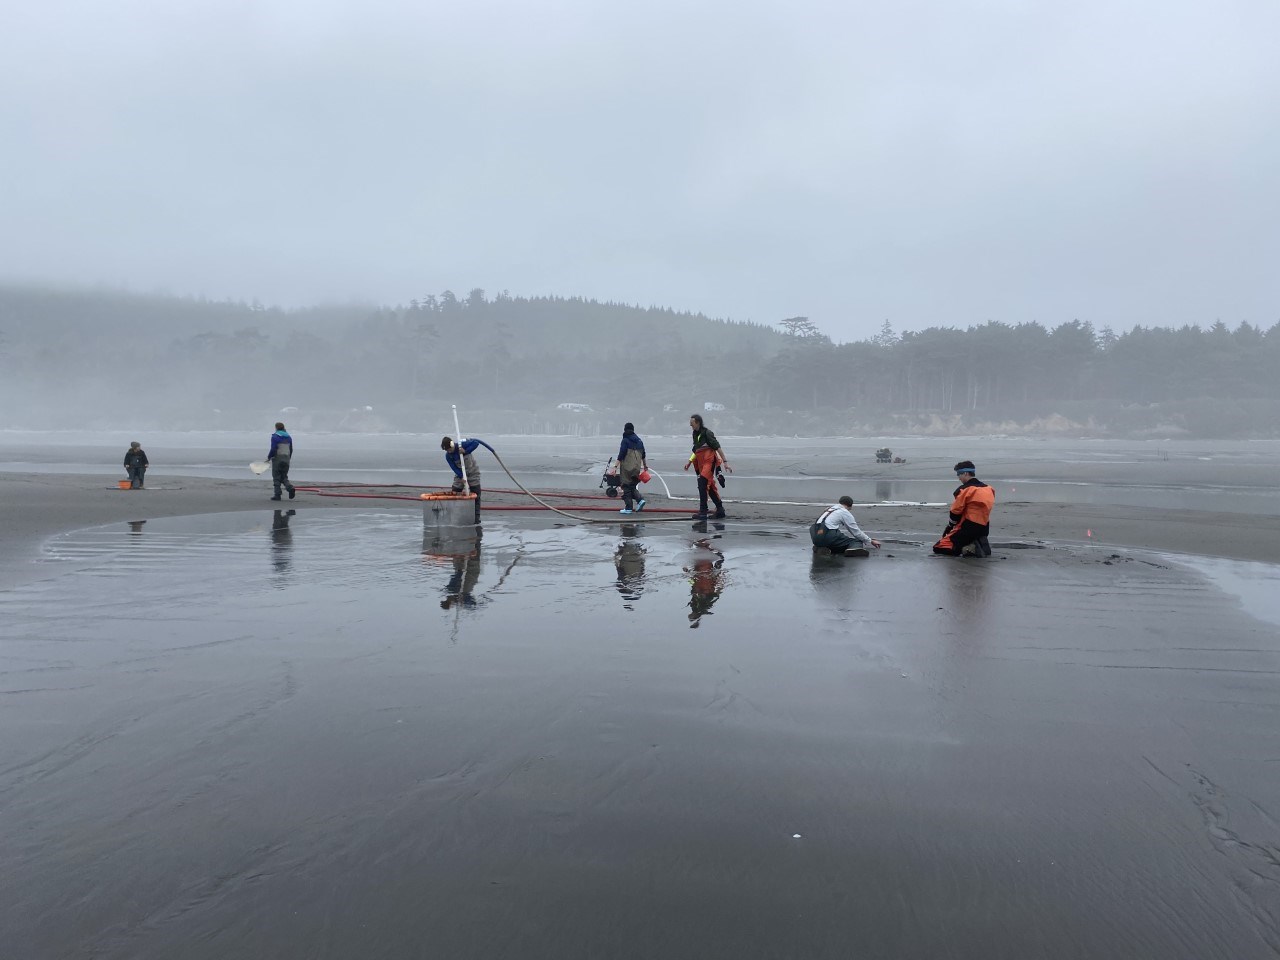 Groups of people wearing waders and holding tubes and other equipment work on the beach on a foggy day.